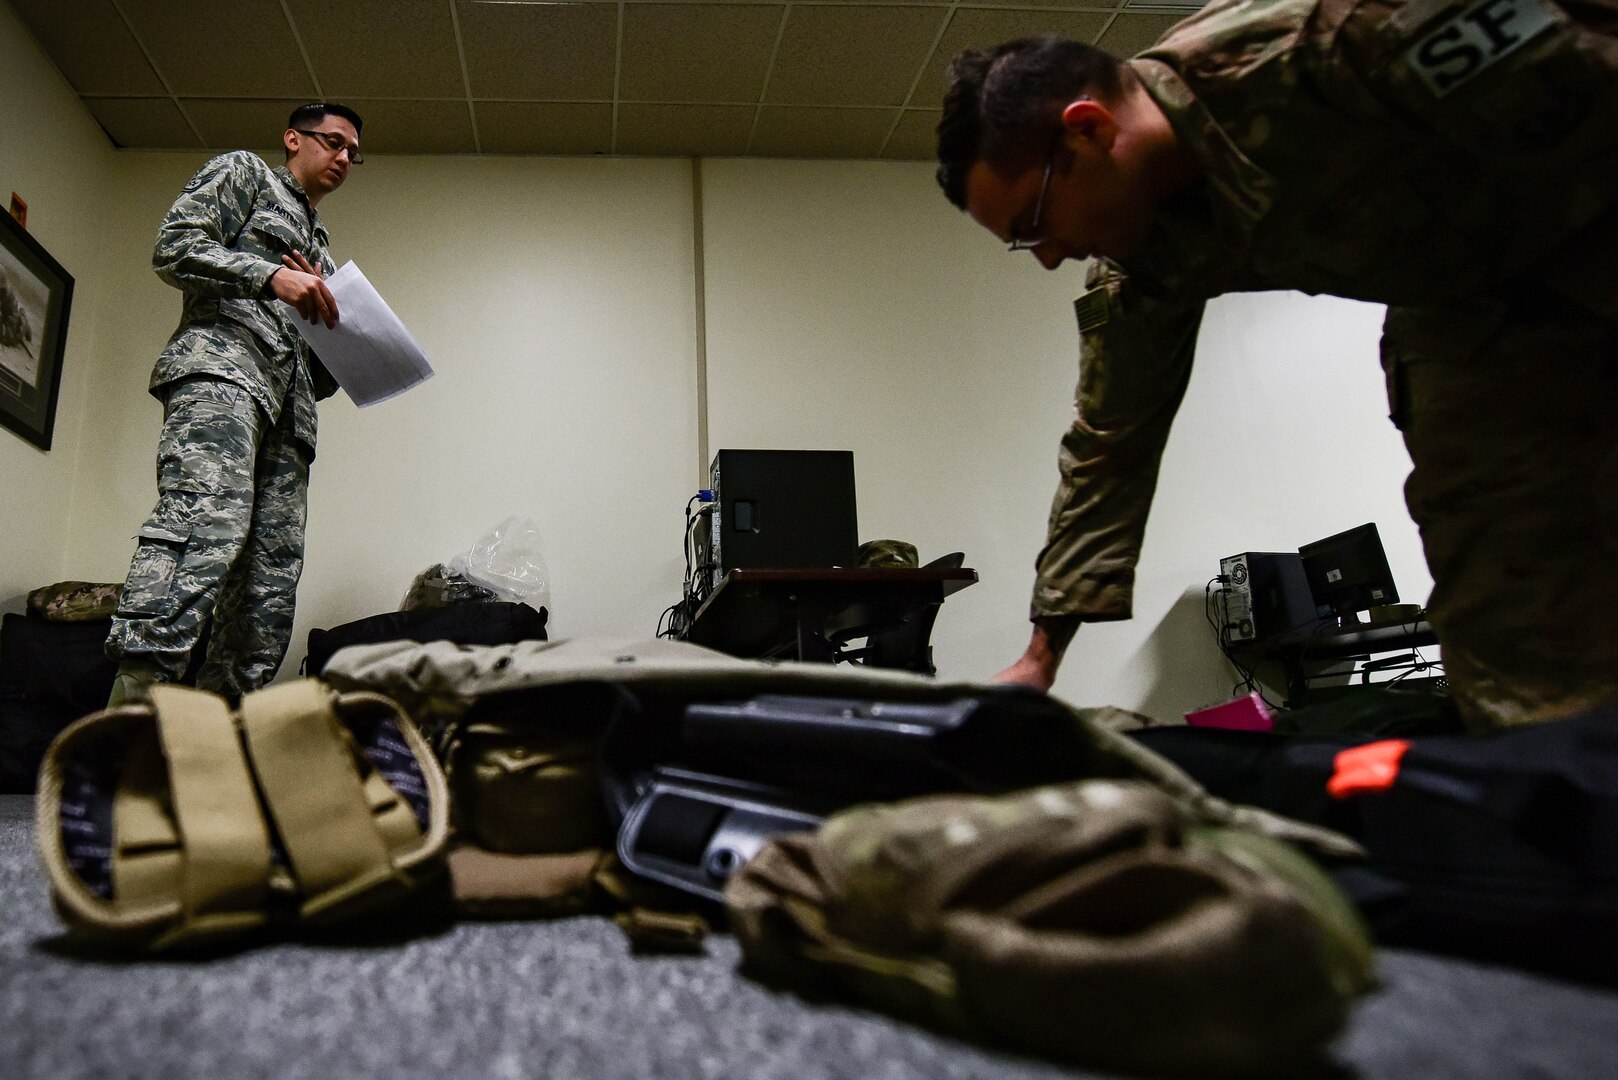 U.S. Air Force Staff Sgt. Justin Martinez, 20th Security Forces Squadron (SFS) unit deployment manager, left, inspects Senior Airman Michael Craig, 20th SFS installation patrolman, as he prepares a deployment bag at Shaw Air Force Base, S.C., March 29, 2018.